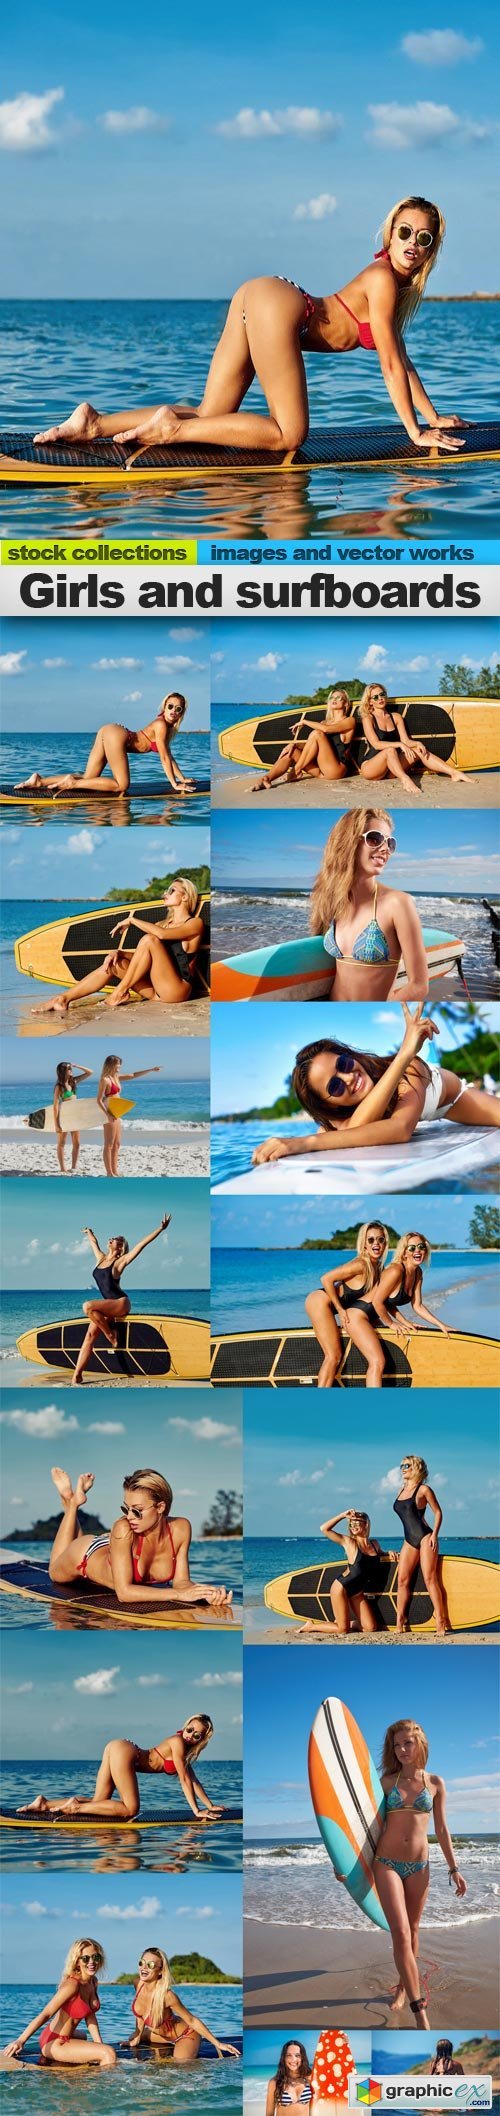 Girls and surfboards, 15 x UHQ JPEG